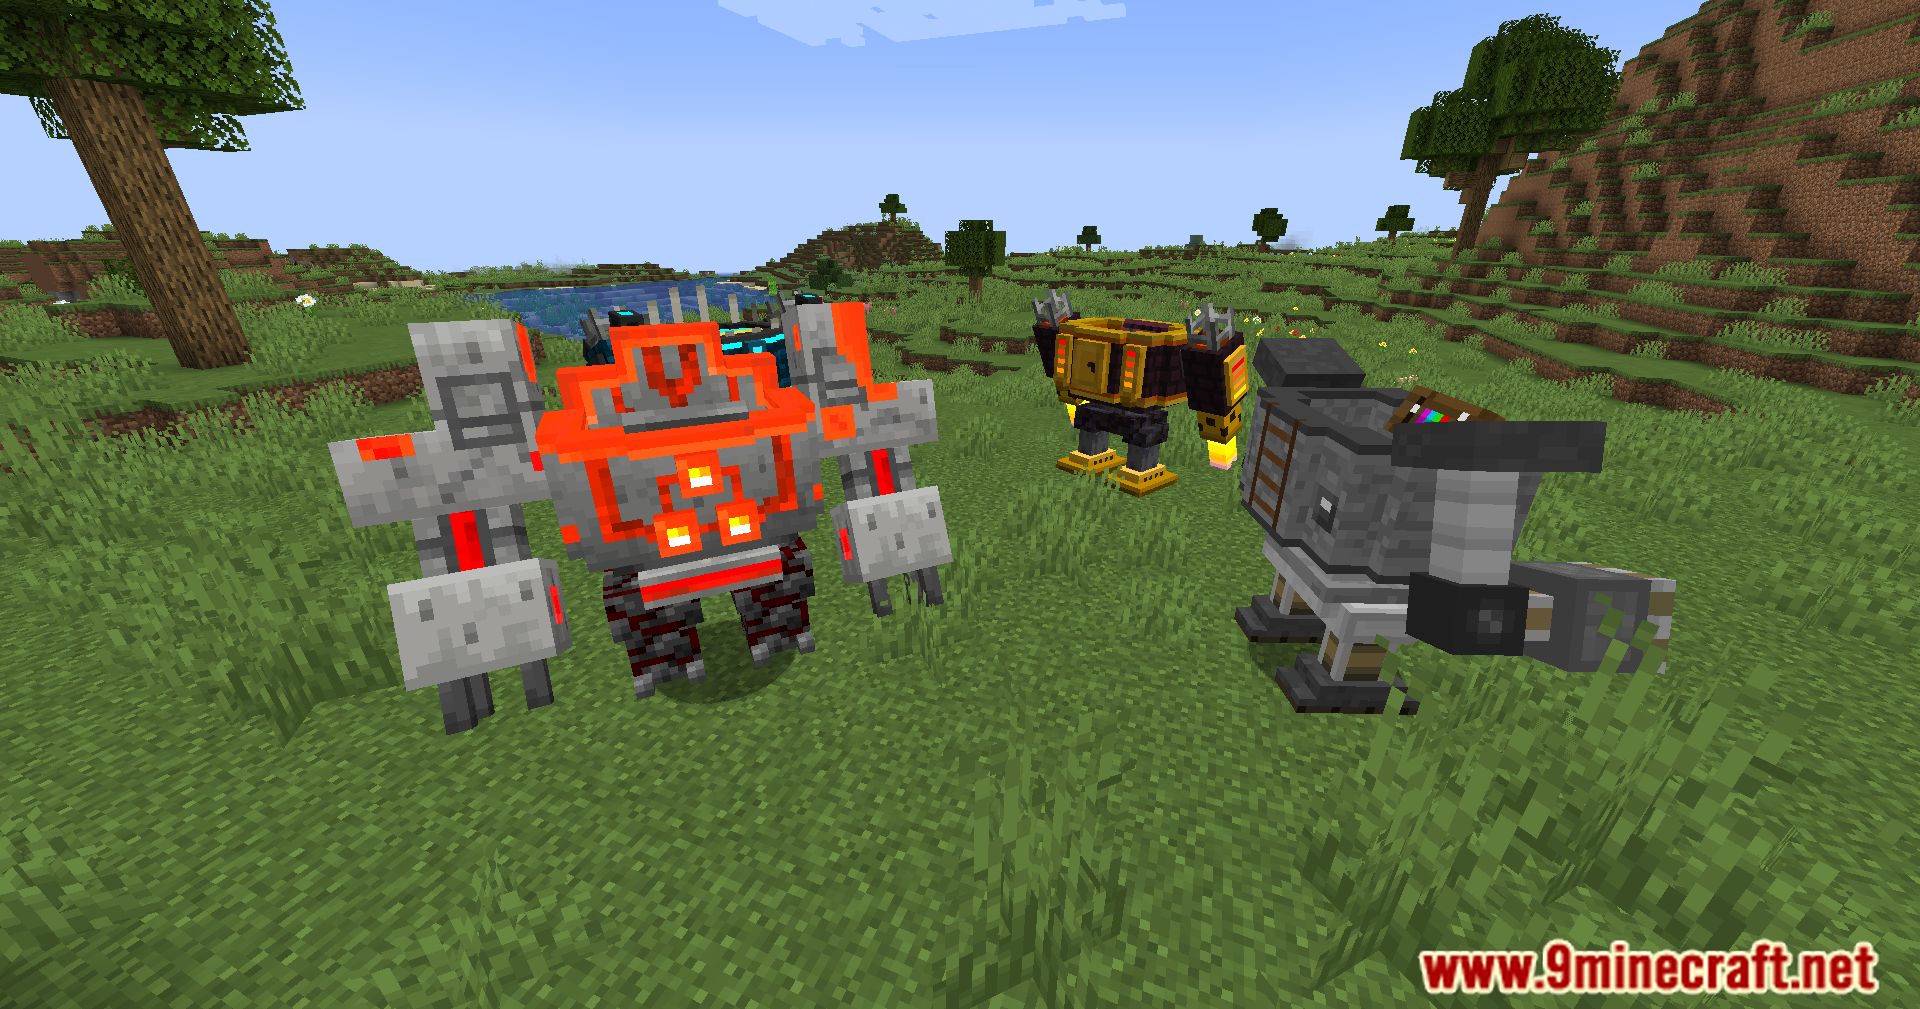 Armored Redstone Mod (1.20.1, 1.19.3) - Forge Your Path With Redstone-Powered Adventures! 5